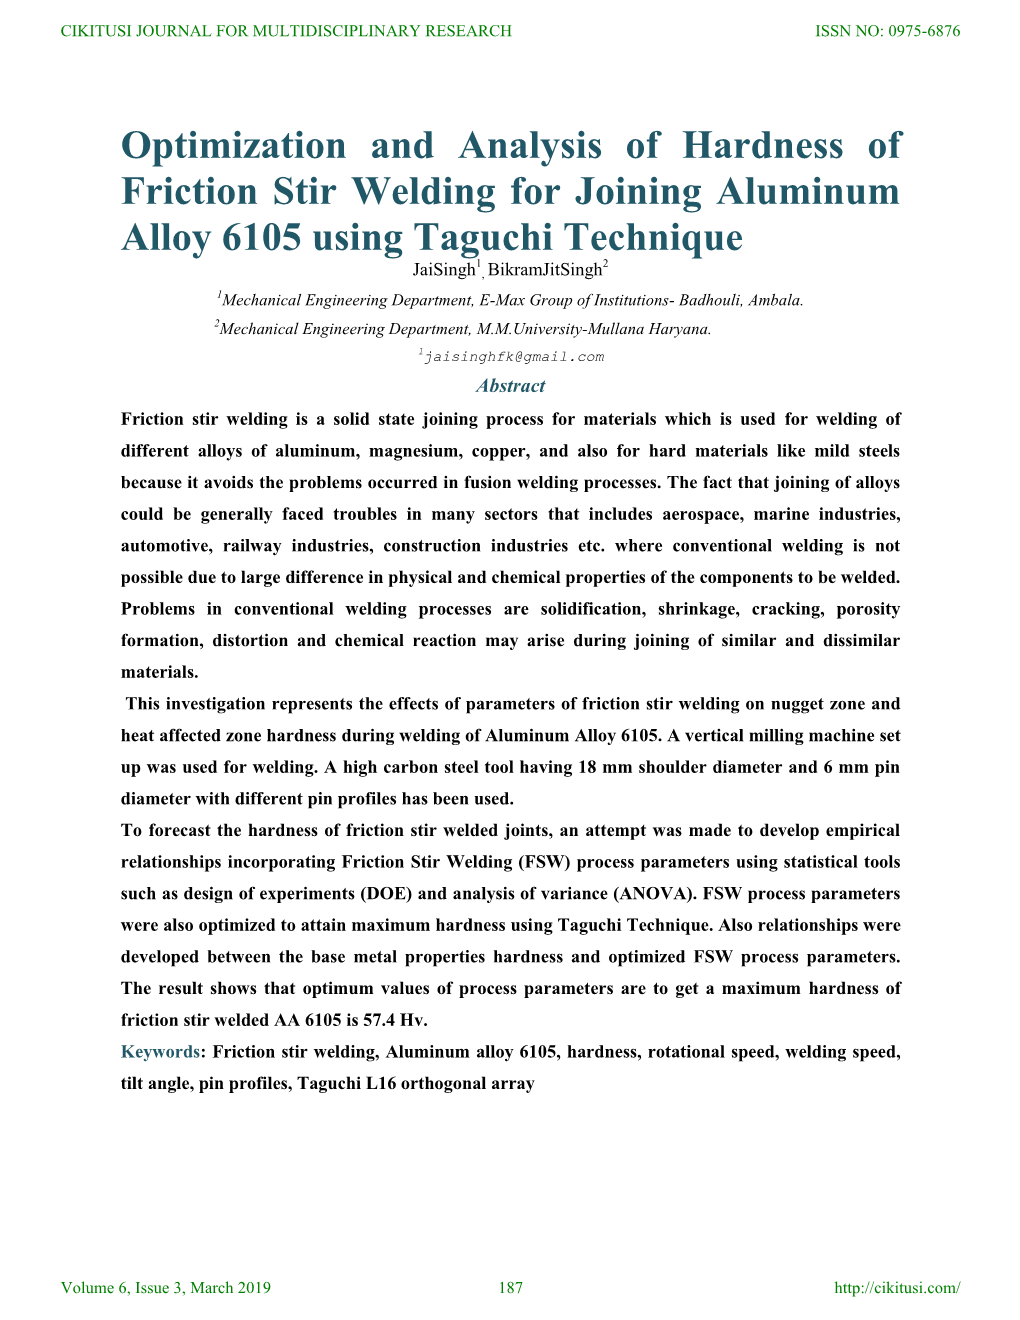 Optimization and Analysis of Hardness of Friction Stir Welding For